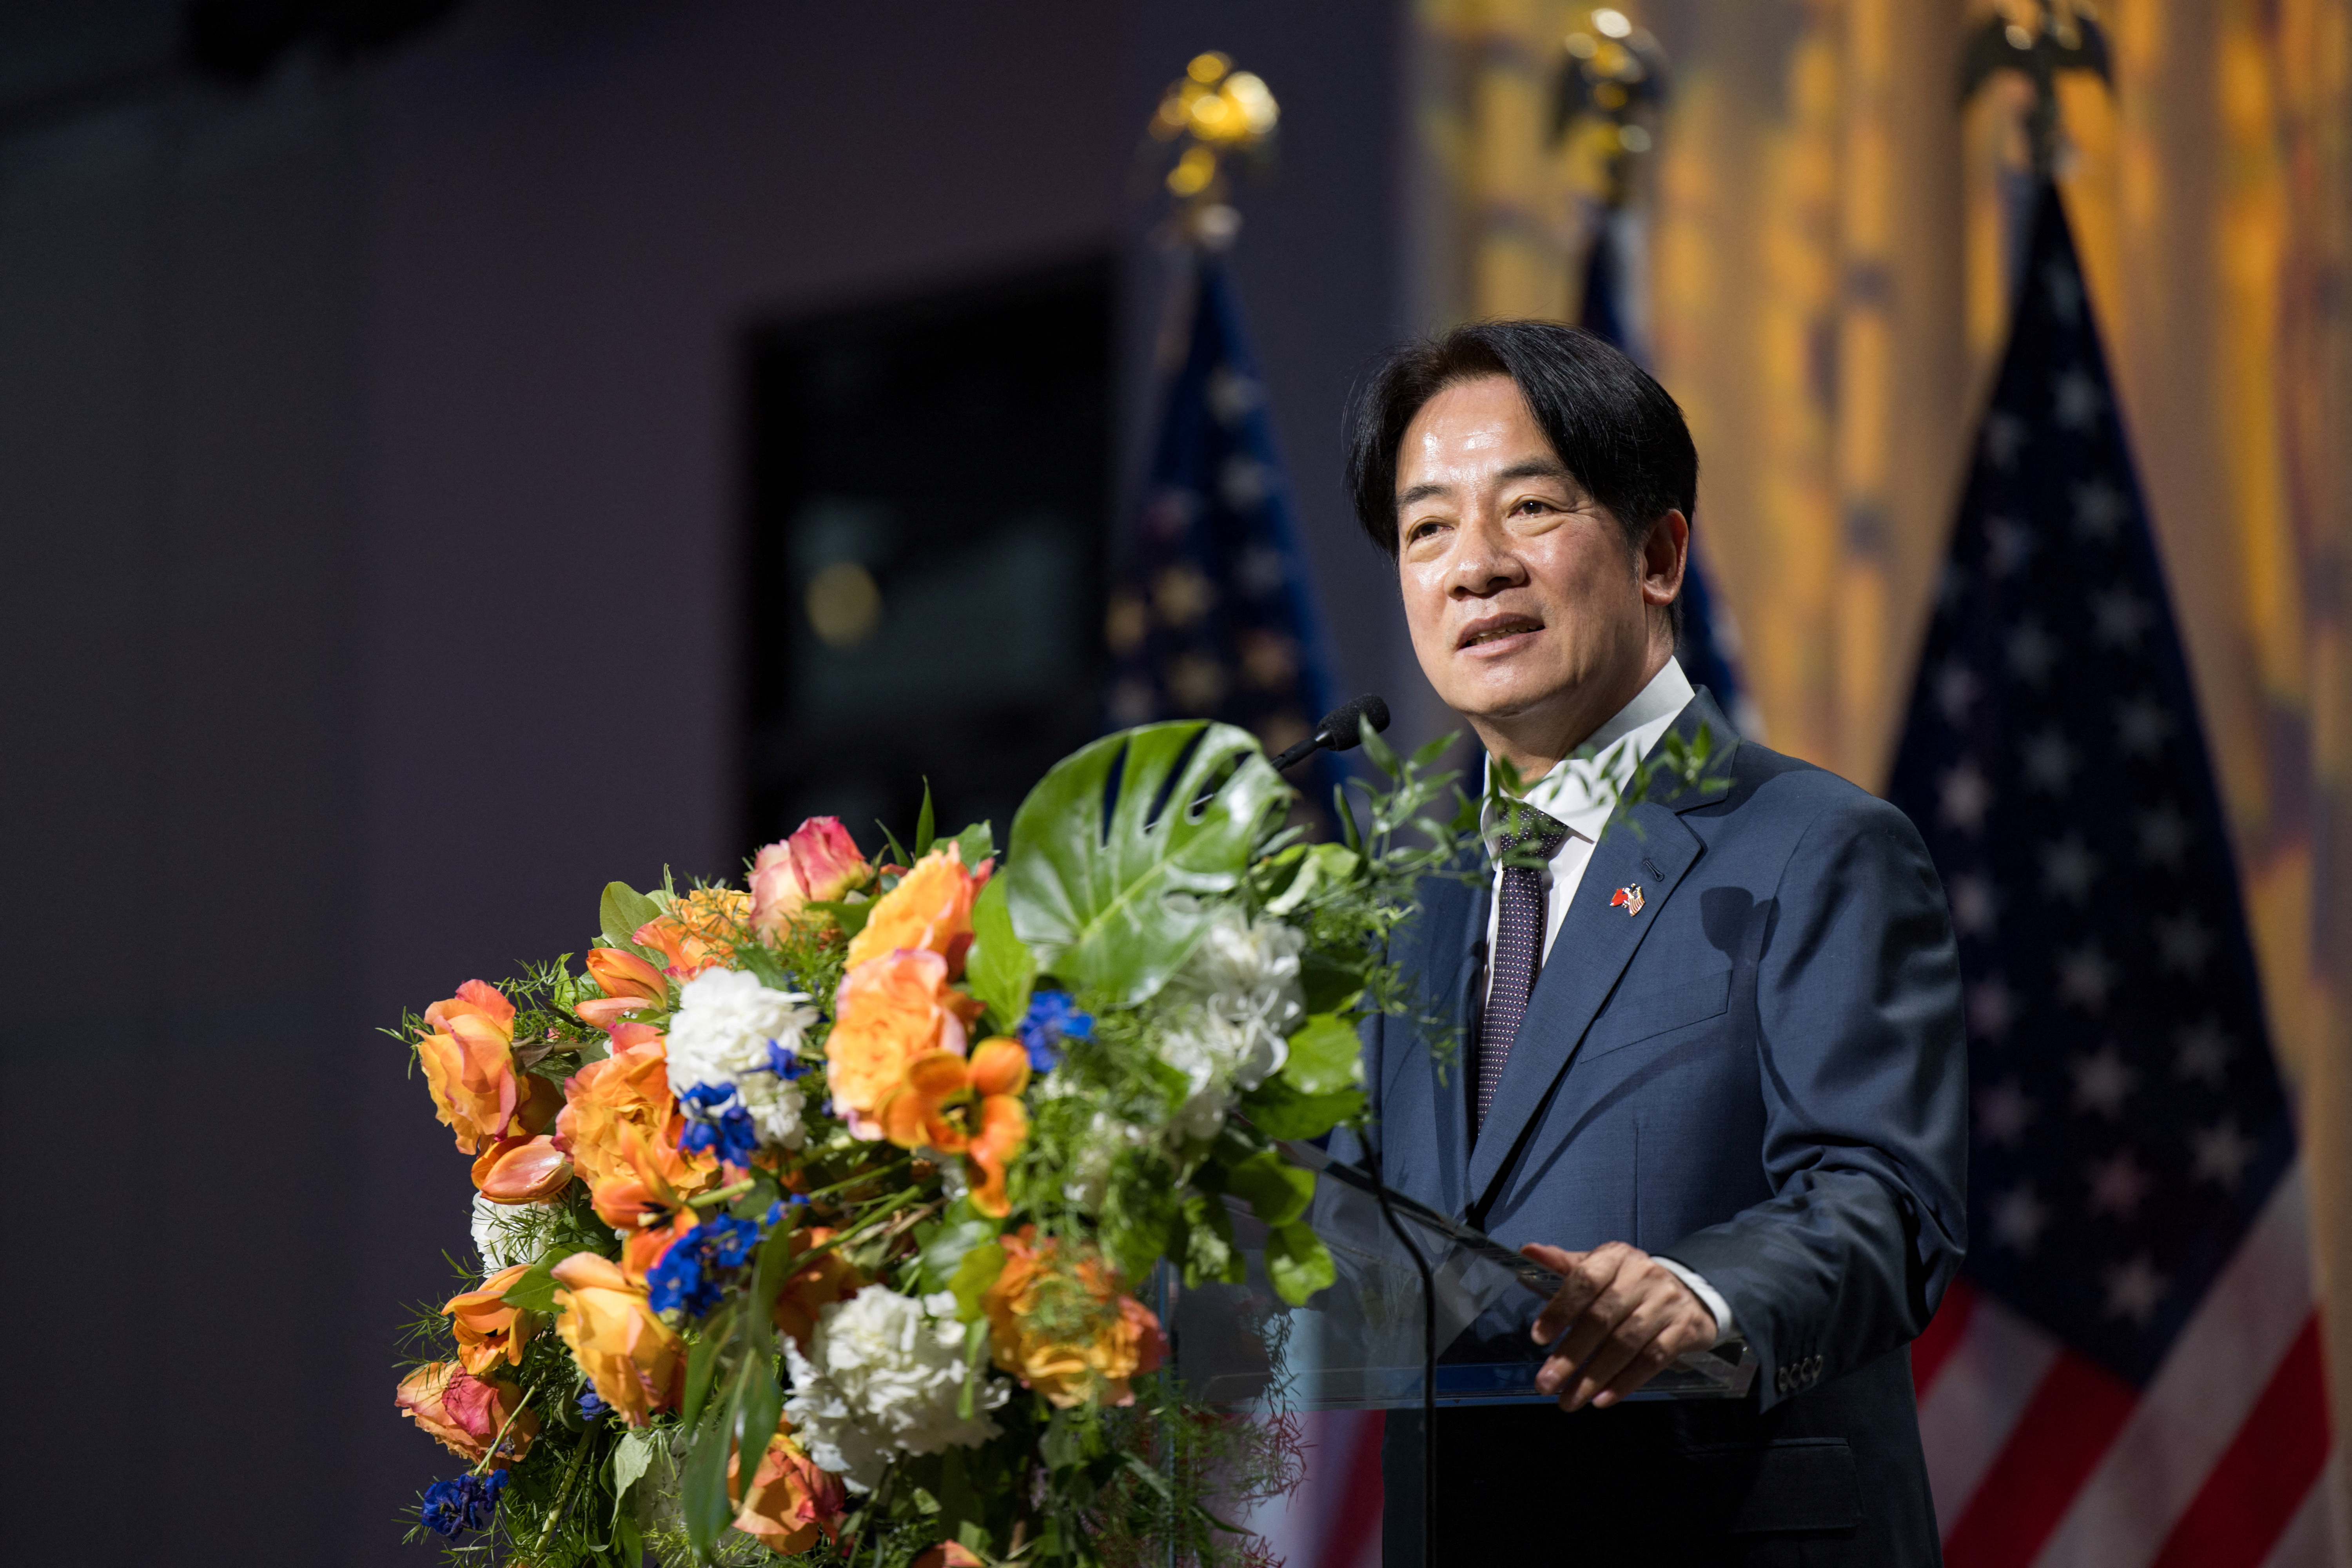 Taiwan's Vice President William Lai attends a luncheon in New York City, New York